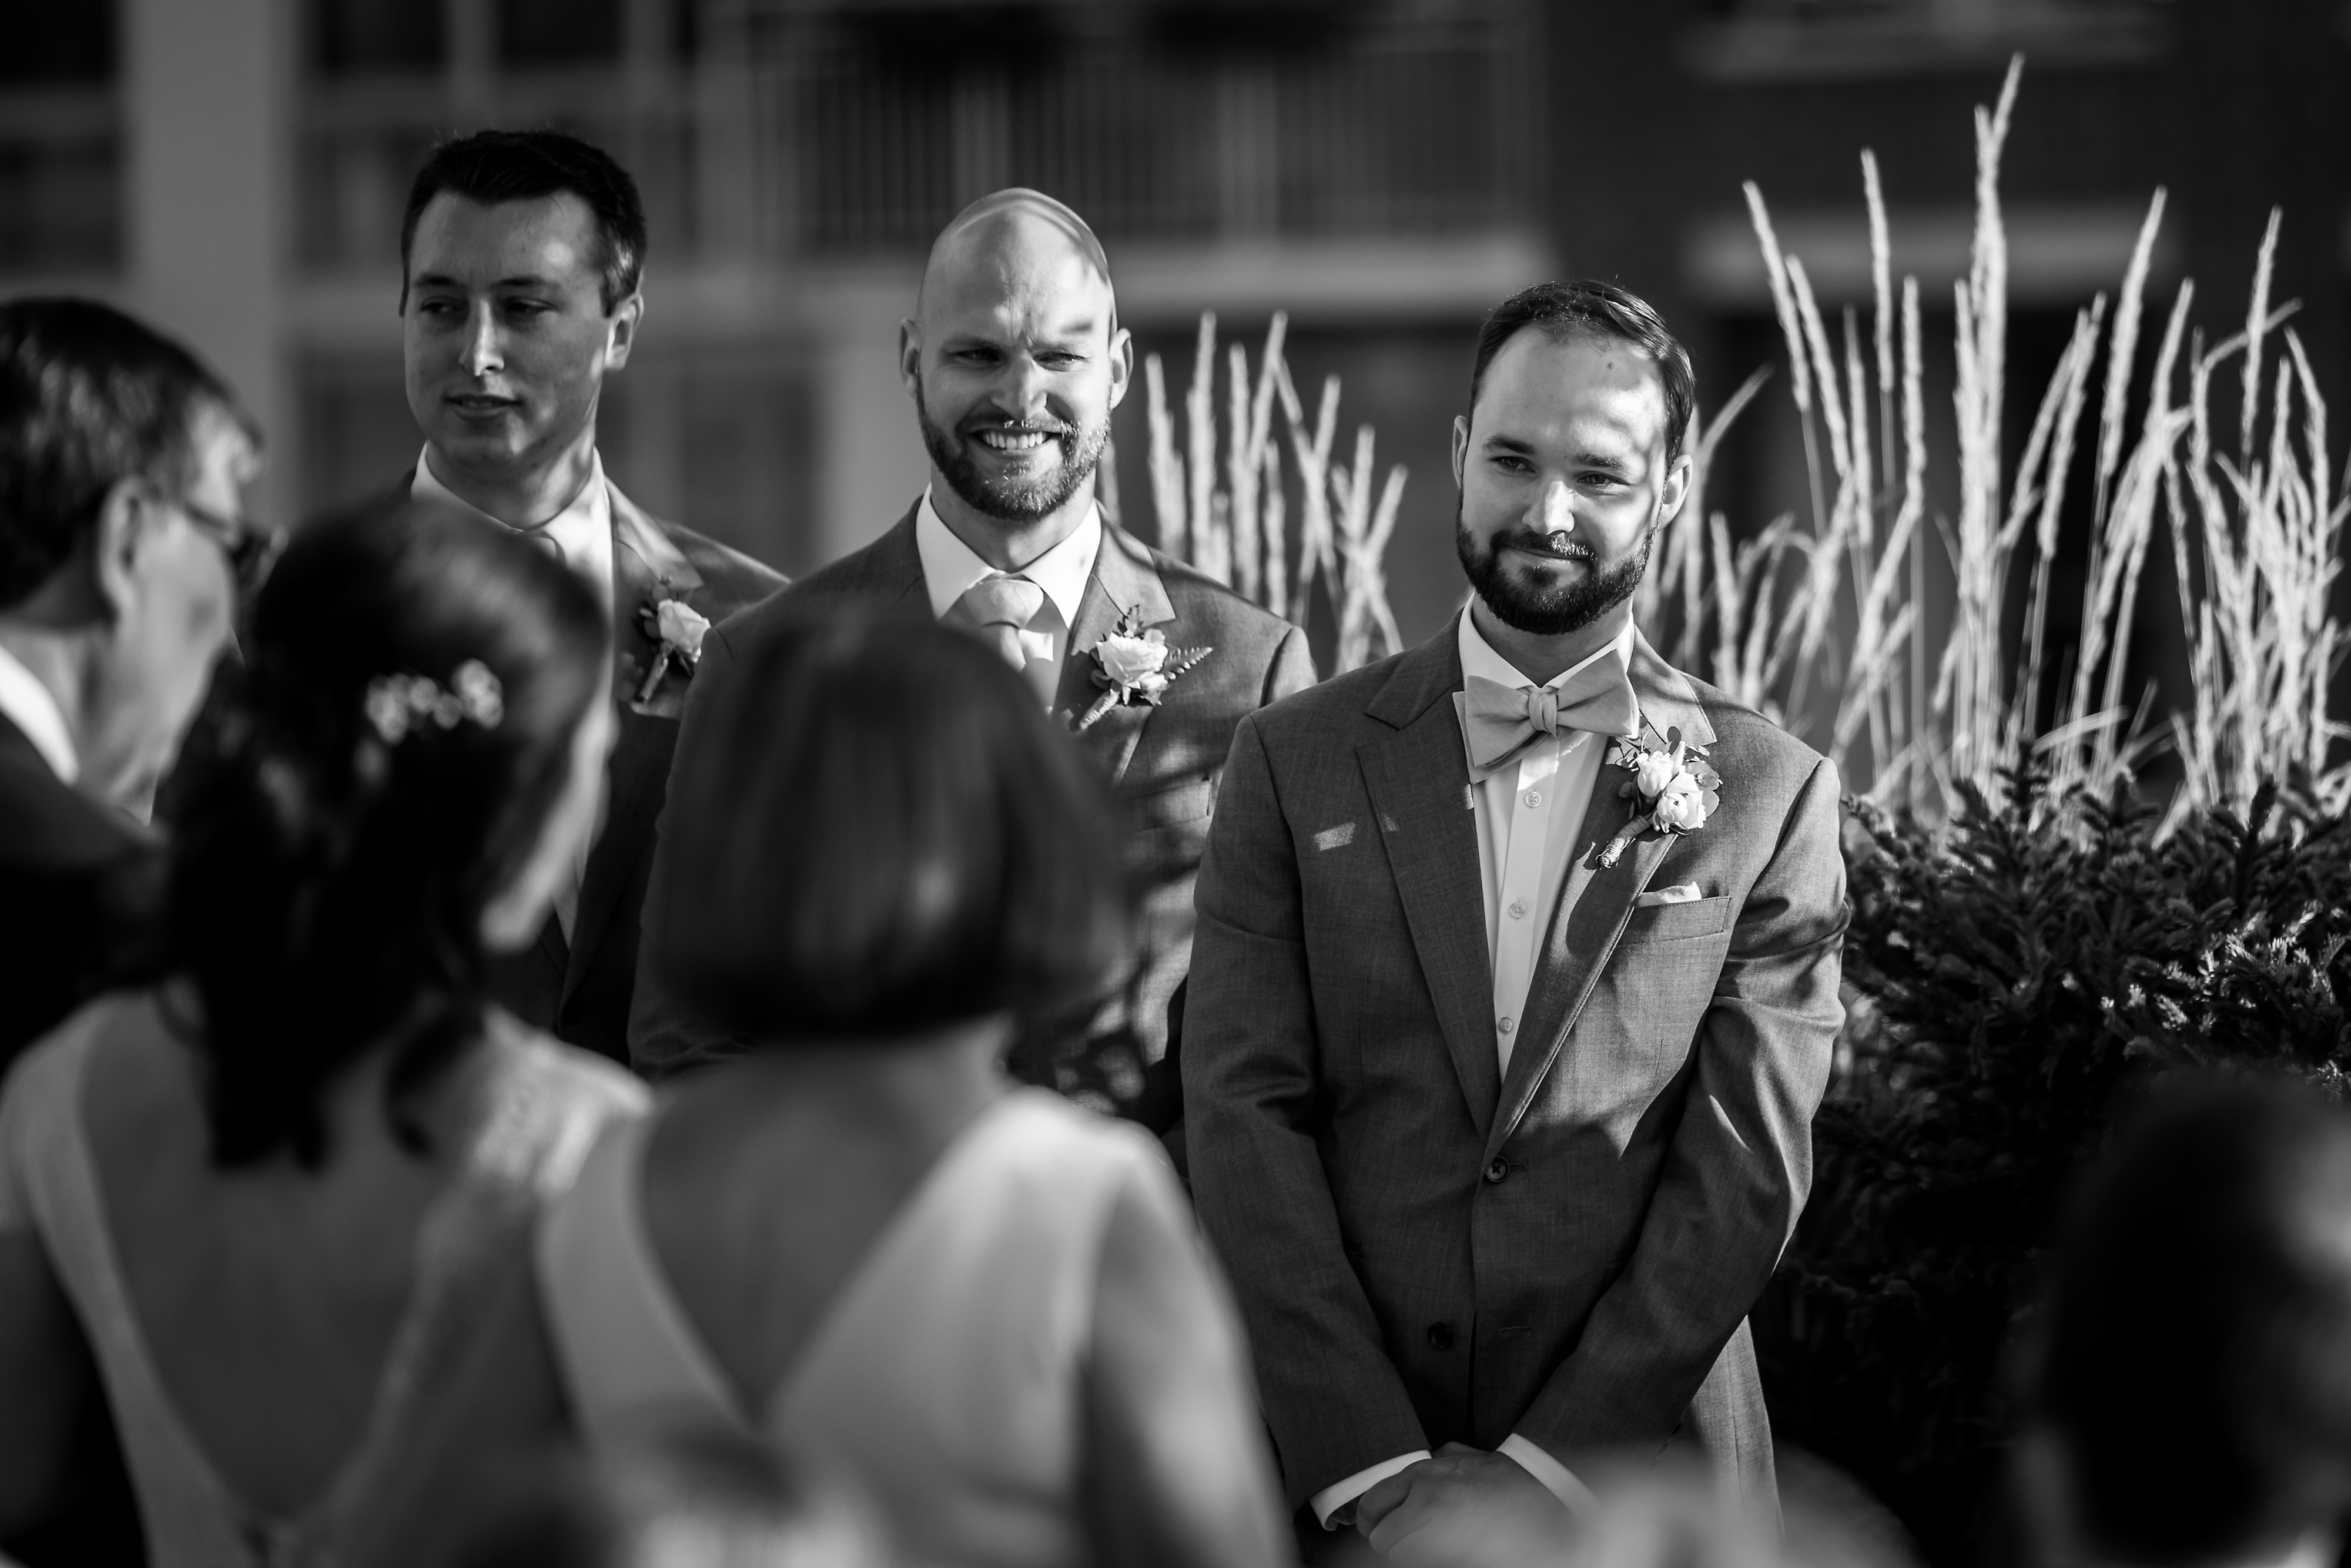 Groom reacts to seeing bride walk down the aisle during wedding ceremony at Loft Lucia in Chicago's West Loop neighborhood.